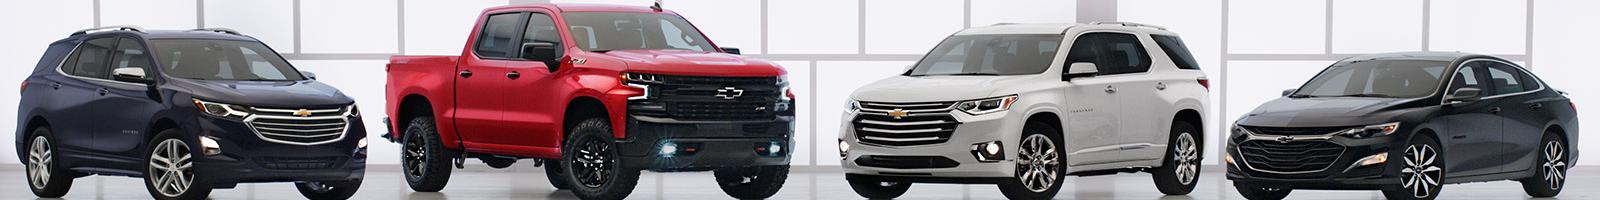 A lineup of Chevy 2019 vehicles.